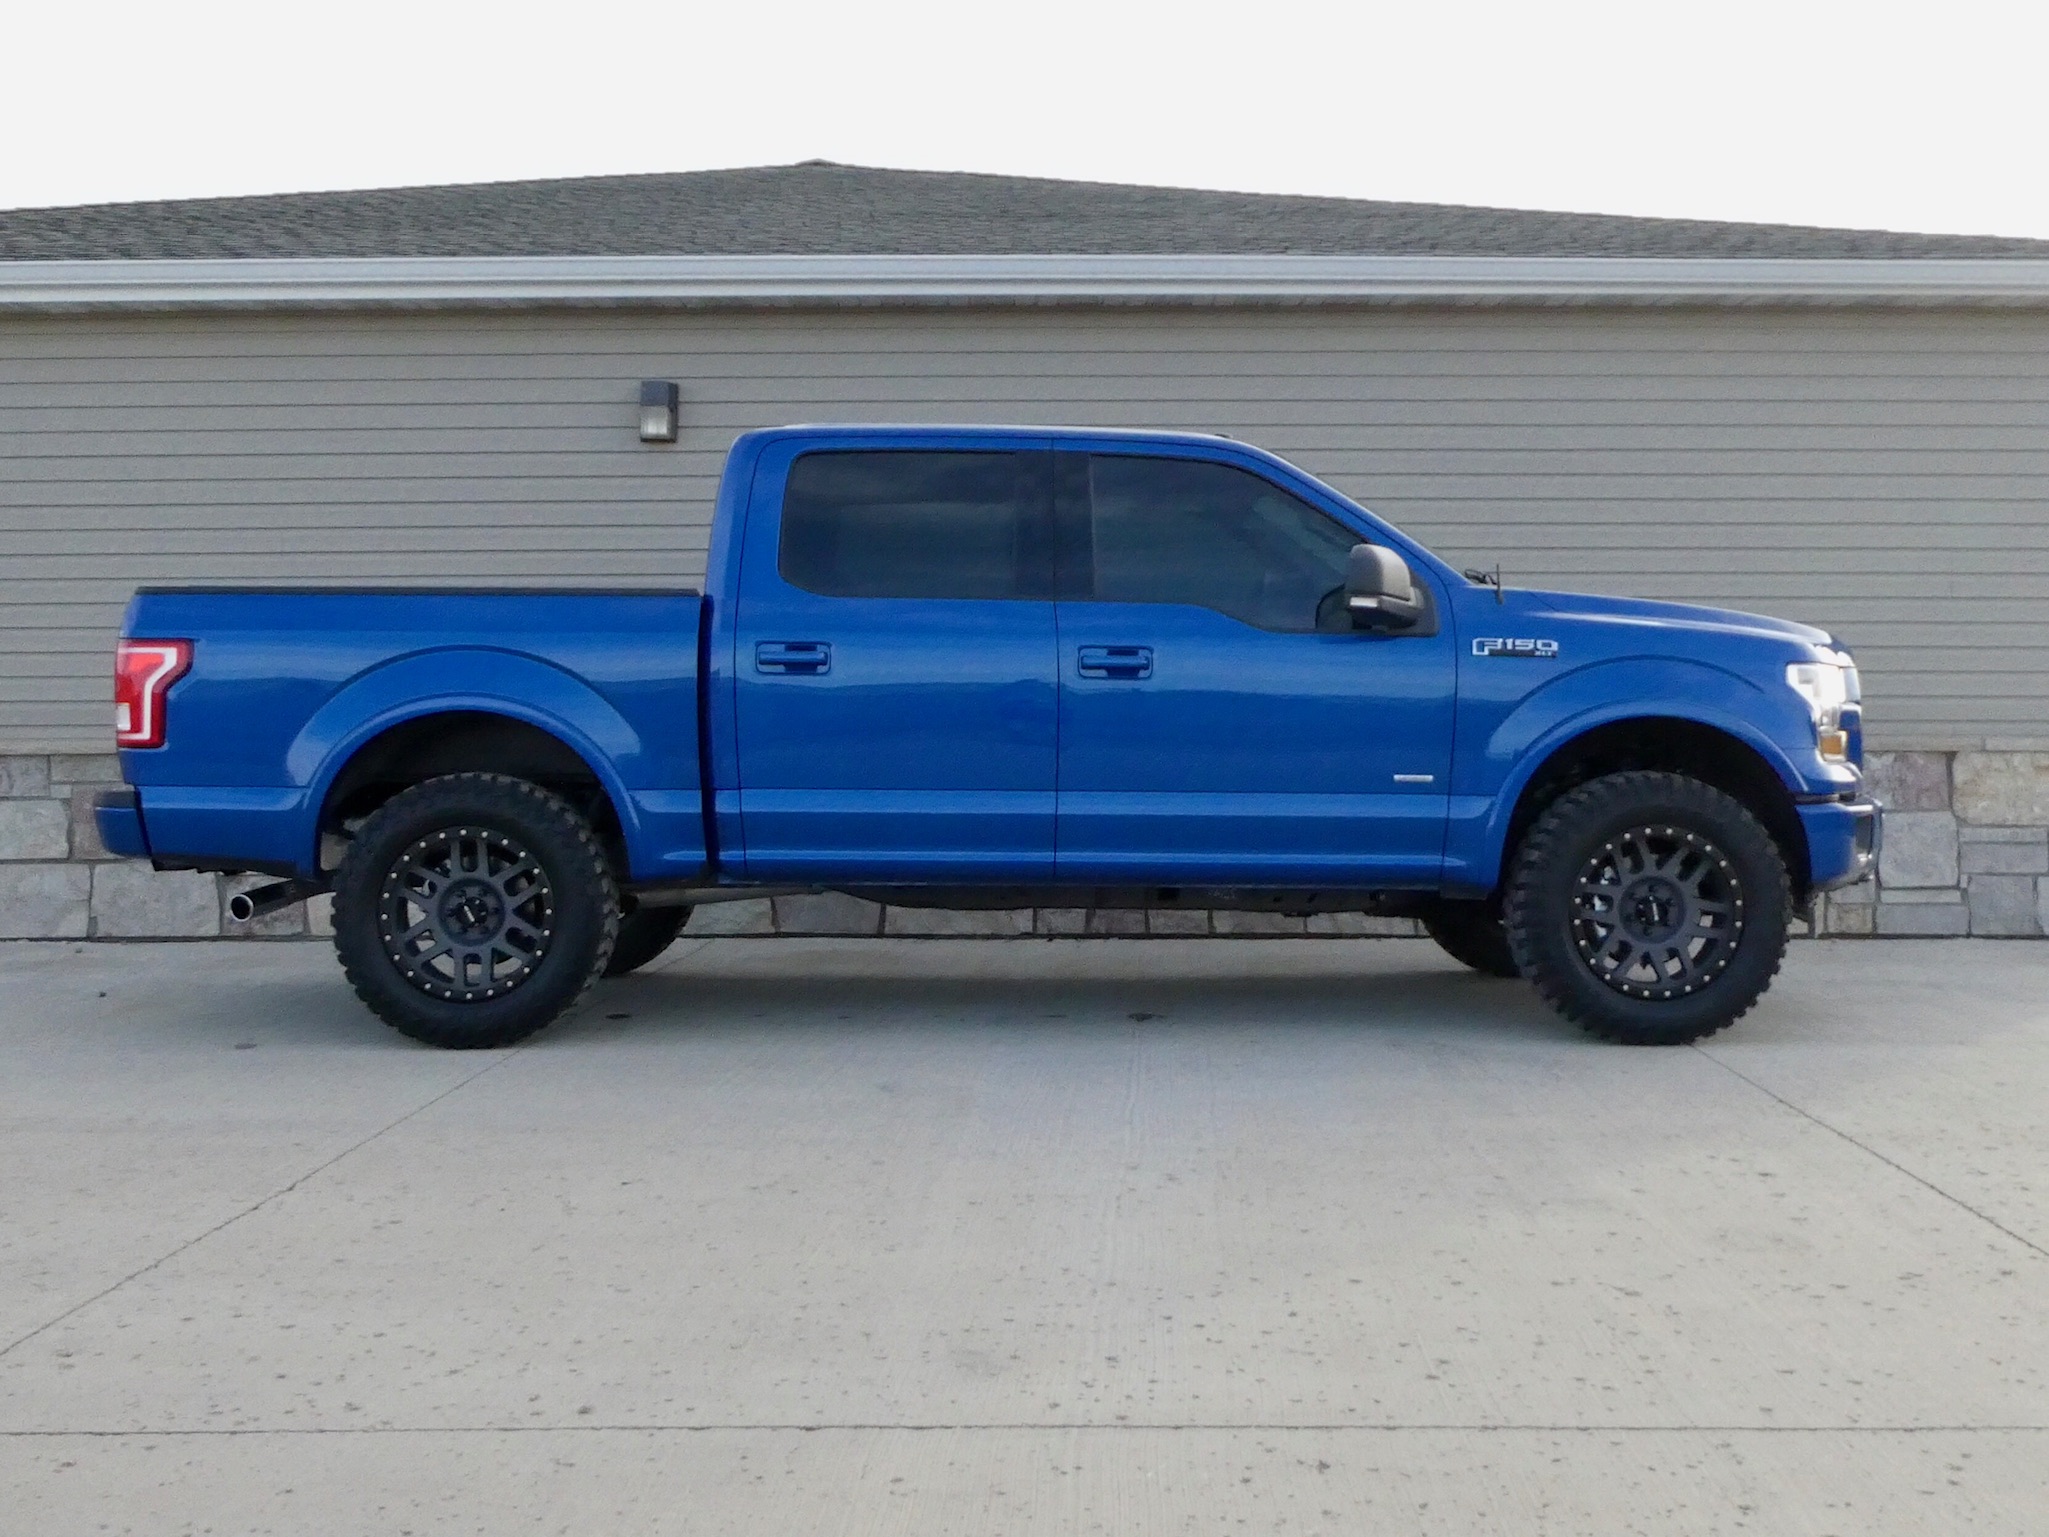 Lightning Blue!! - Damn that's one gorgeous color - Show yours please. -  Ford F150 Forum - Community of Ford Truck Fans